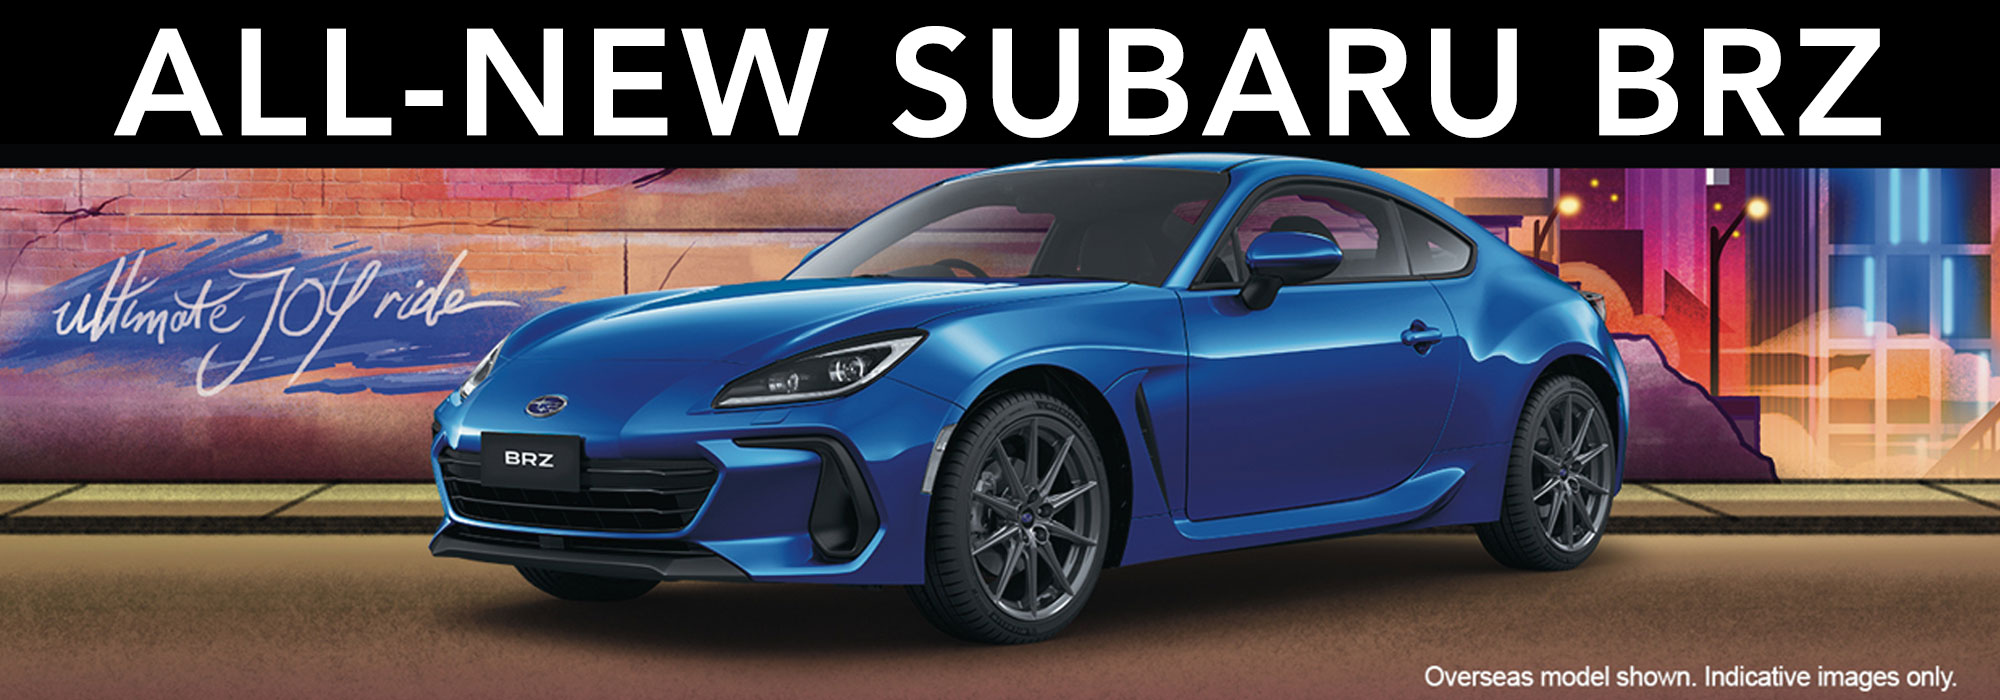 All-New BRZ